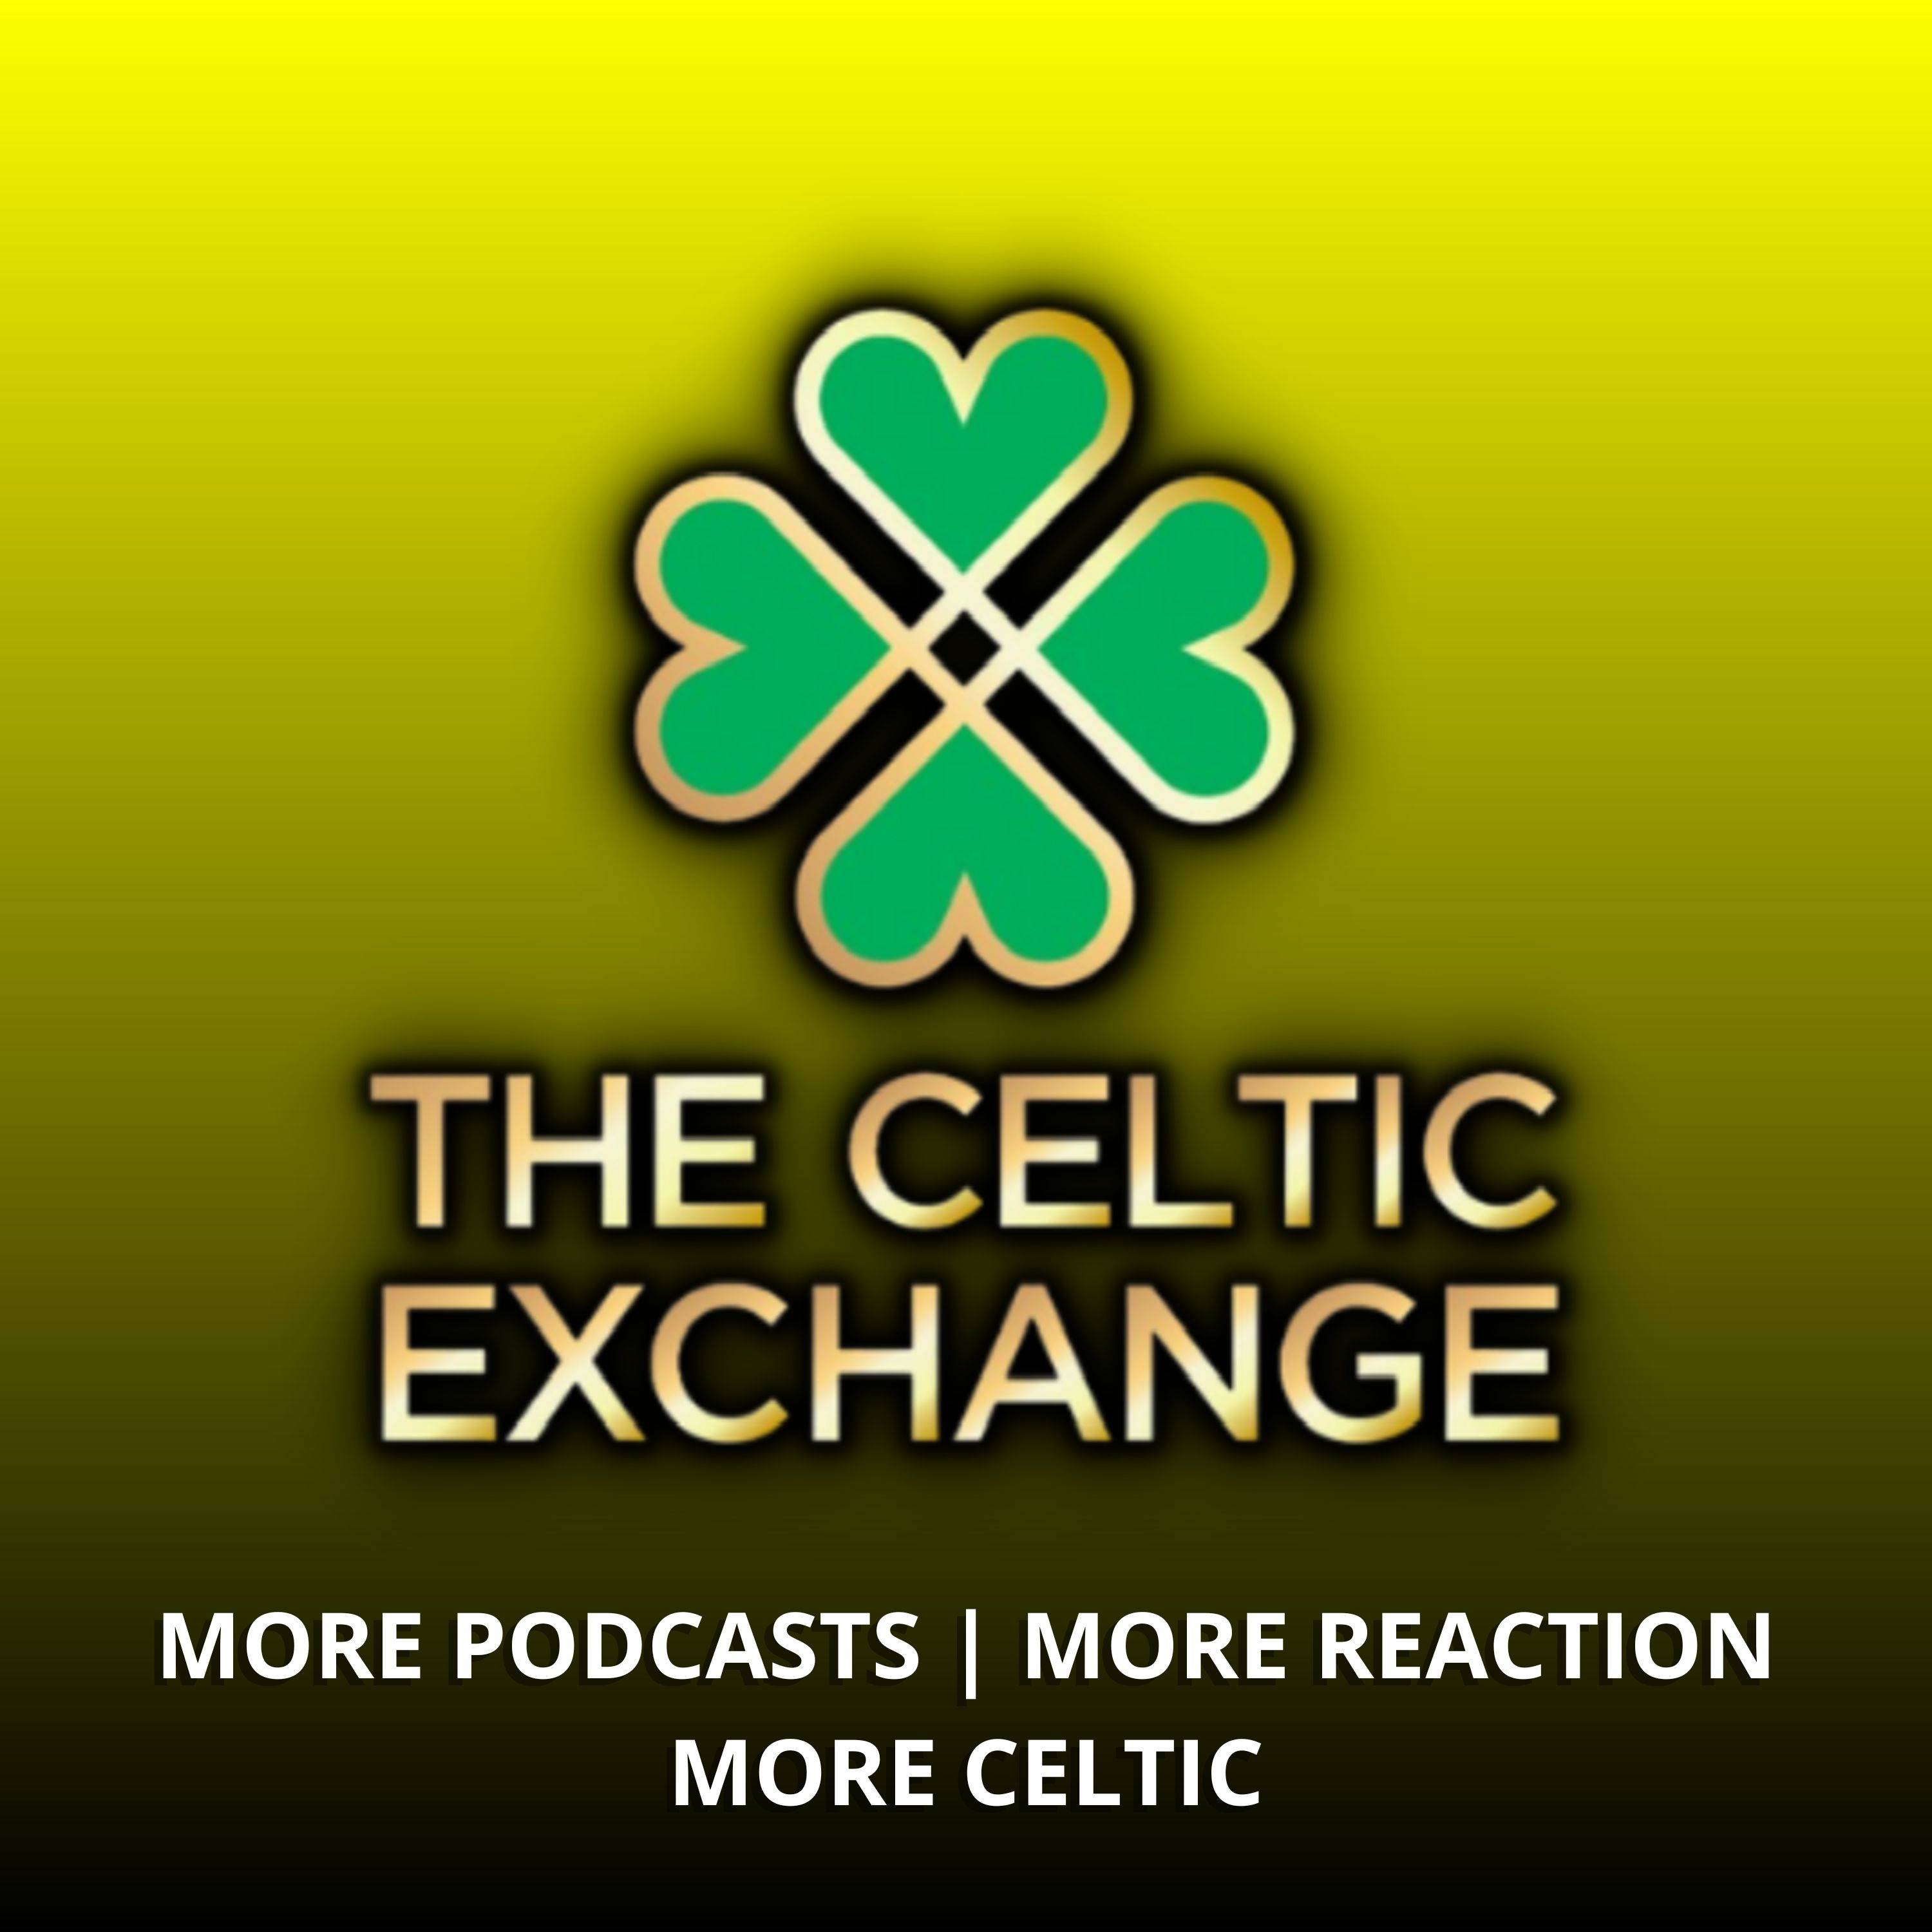 Celtic Exchange Weekly: If Nothing Changes, Then Nothing Changes | Celtic At Mid-Season Crossroads